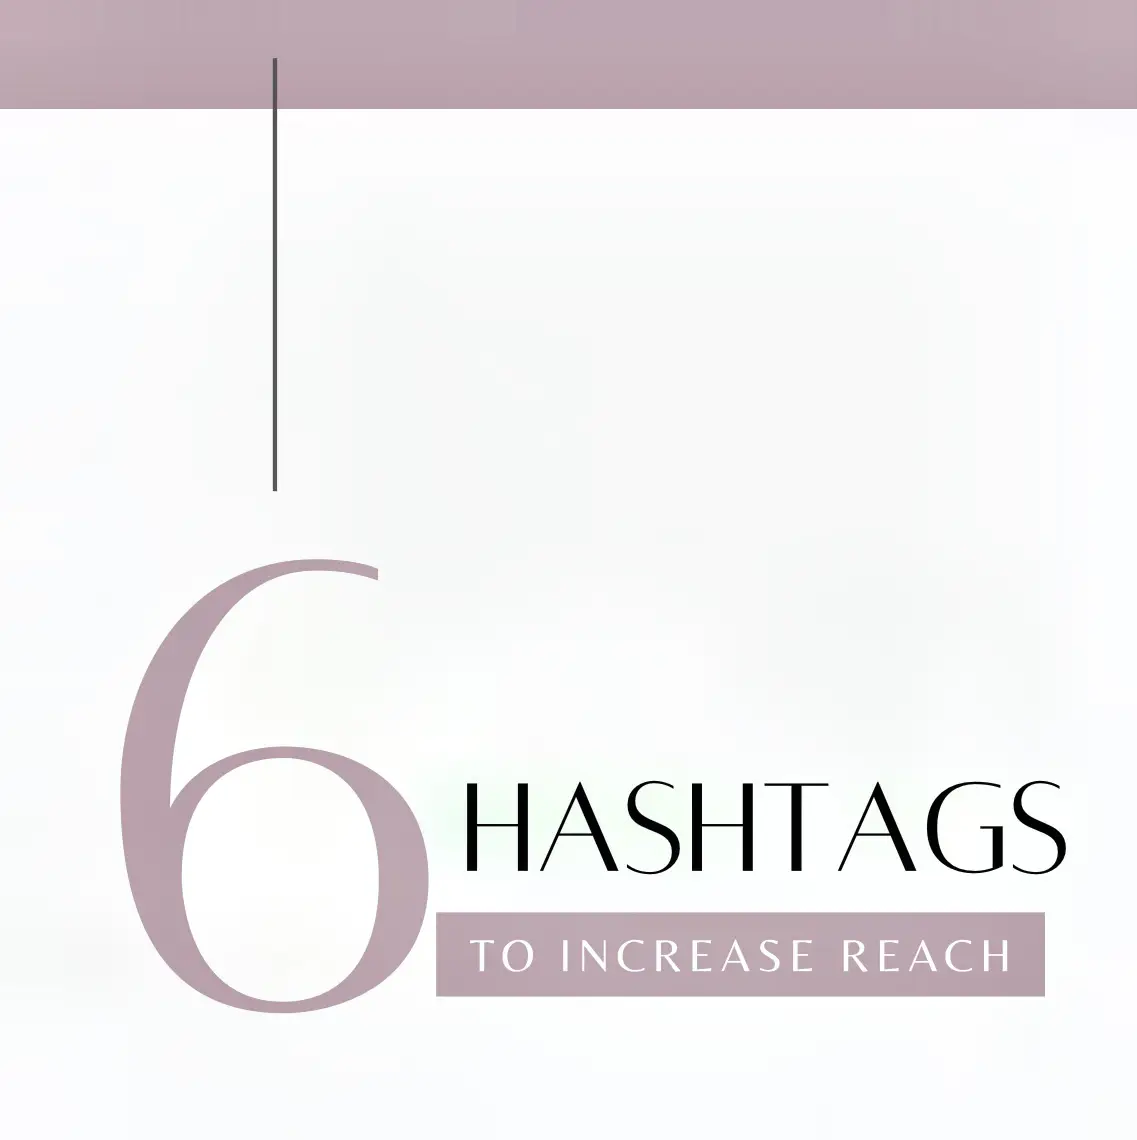  A white background with a black text that says "Hashtags to increase reach".